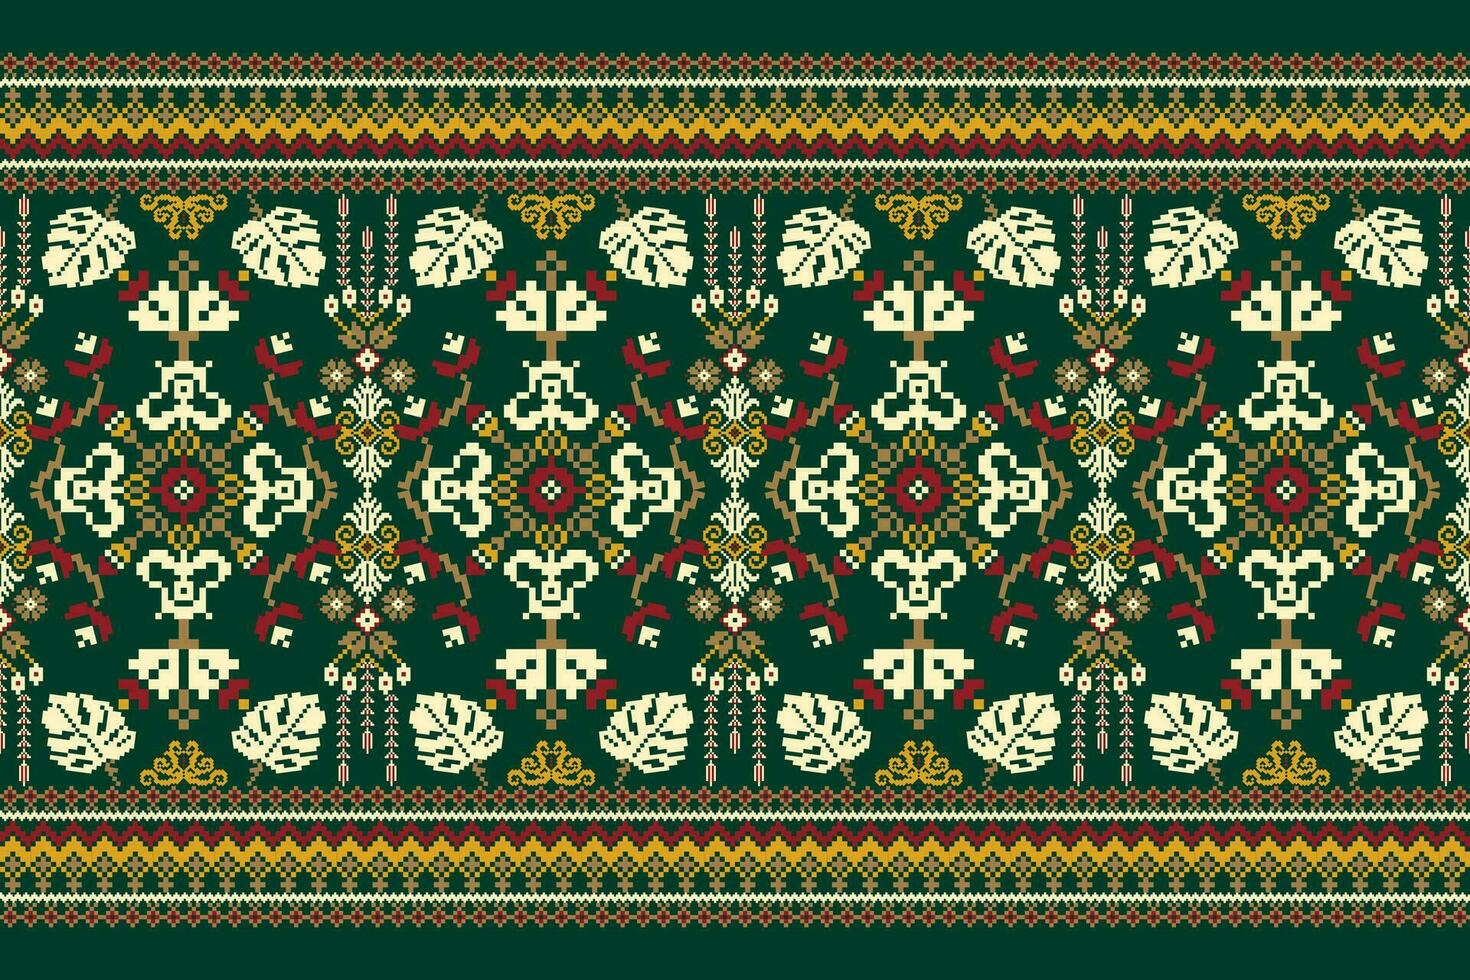 Floral Cross Stitch Embroidery on green background.geometric ethnic oriental pattern traditional.Aztec style abstract vector illustration.design for texture,fabric,clothing,wrapping,decoration,scarf.